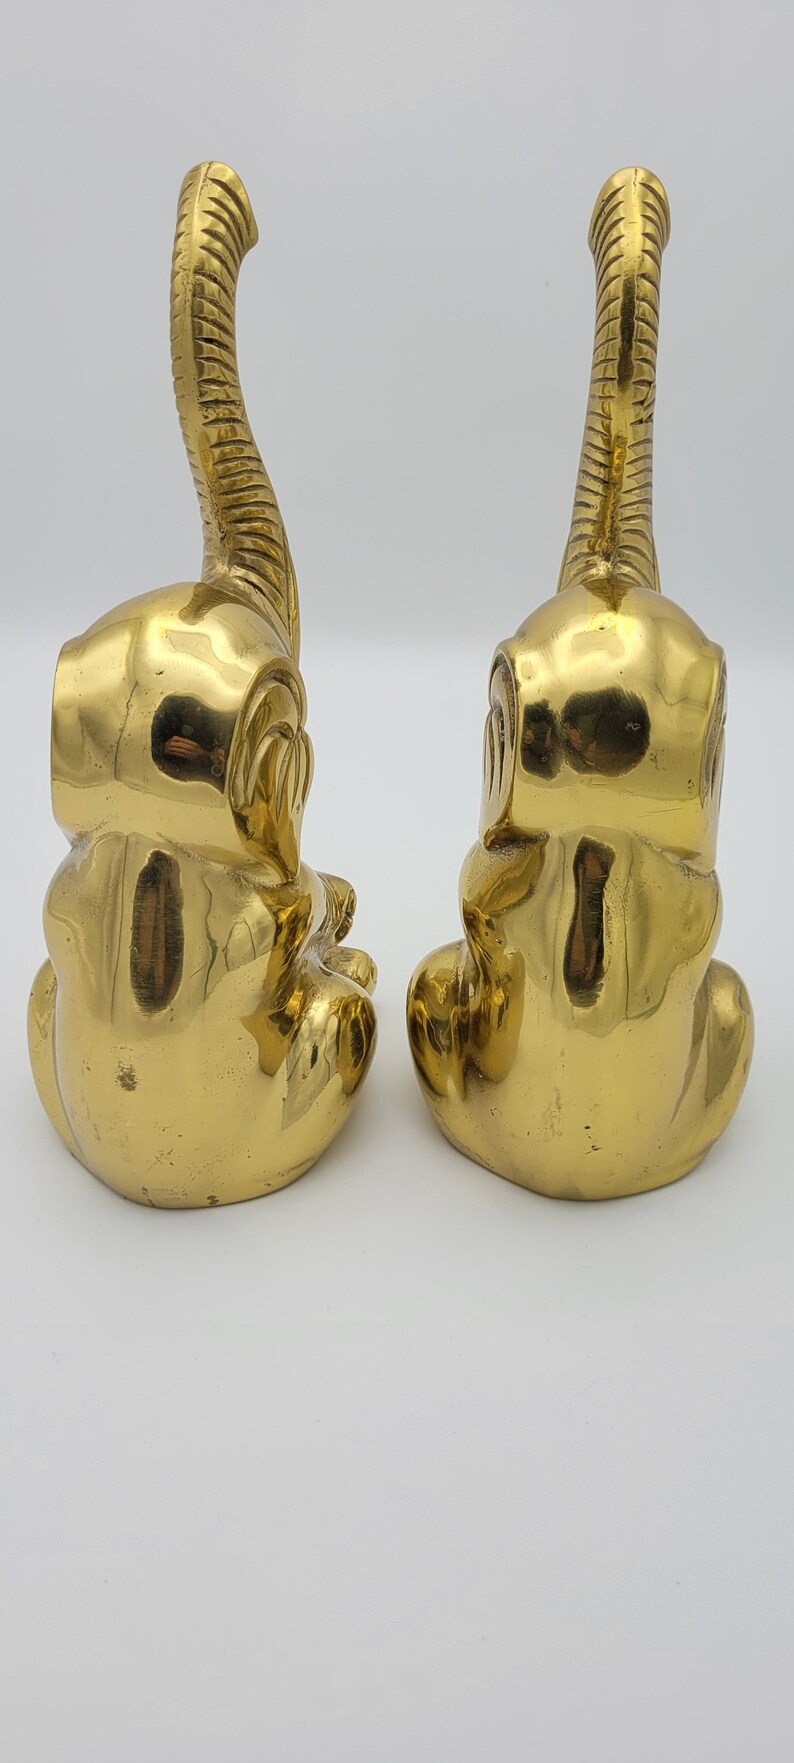 Vintage Genuine Solid Brass elephant Bookends Heavy Pair. Trunk up 9h boho Hollywood regency image 5